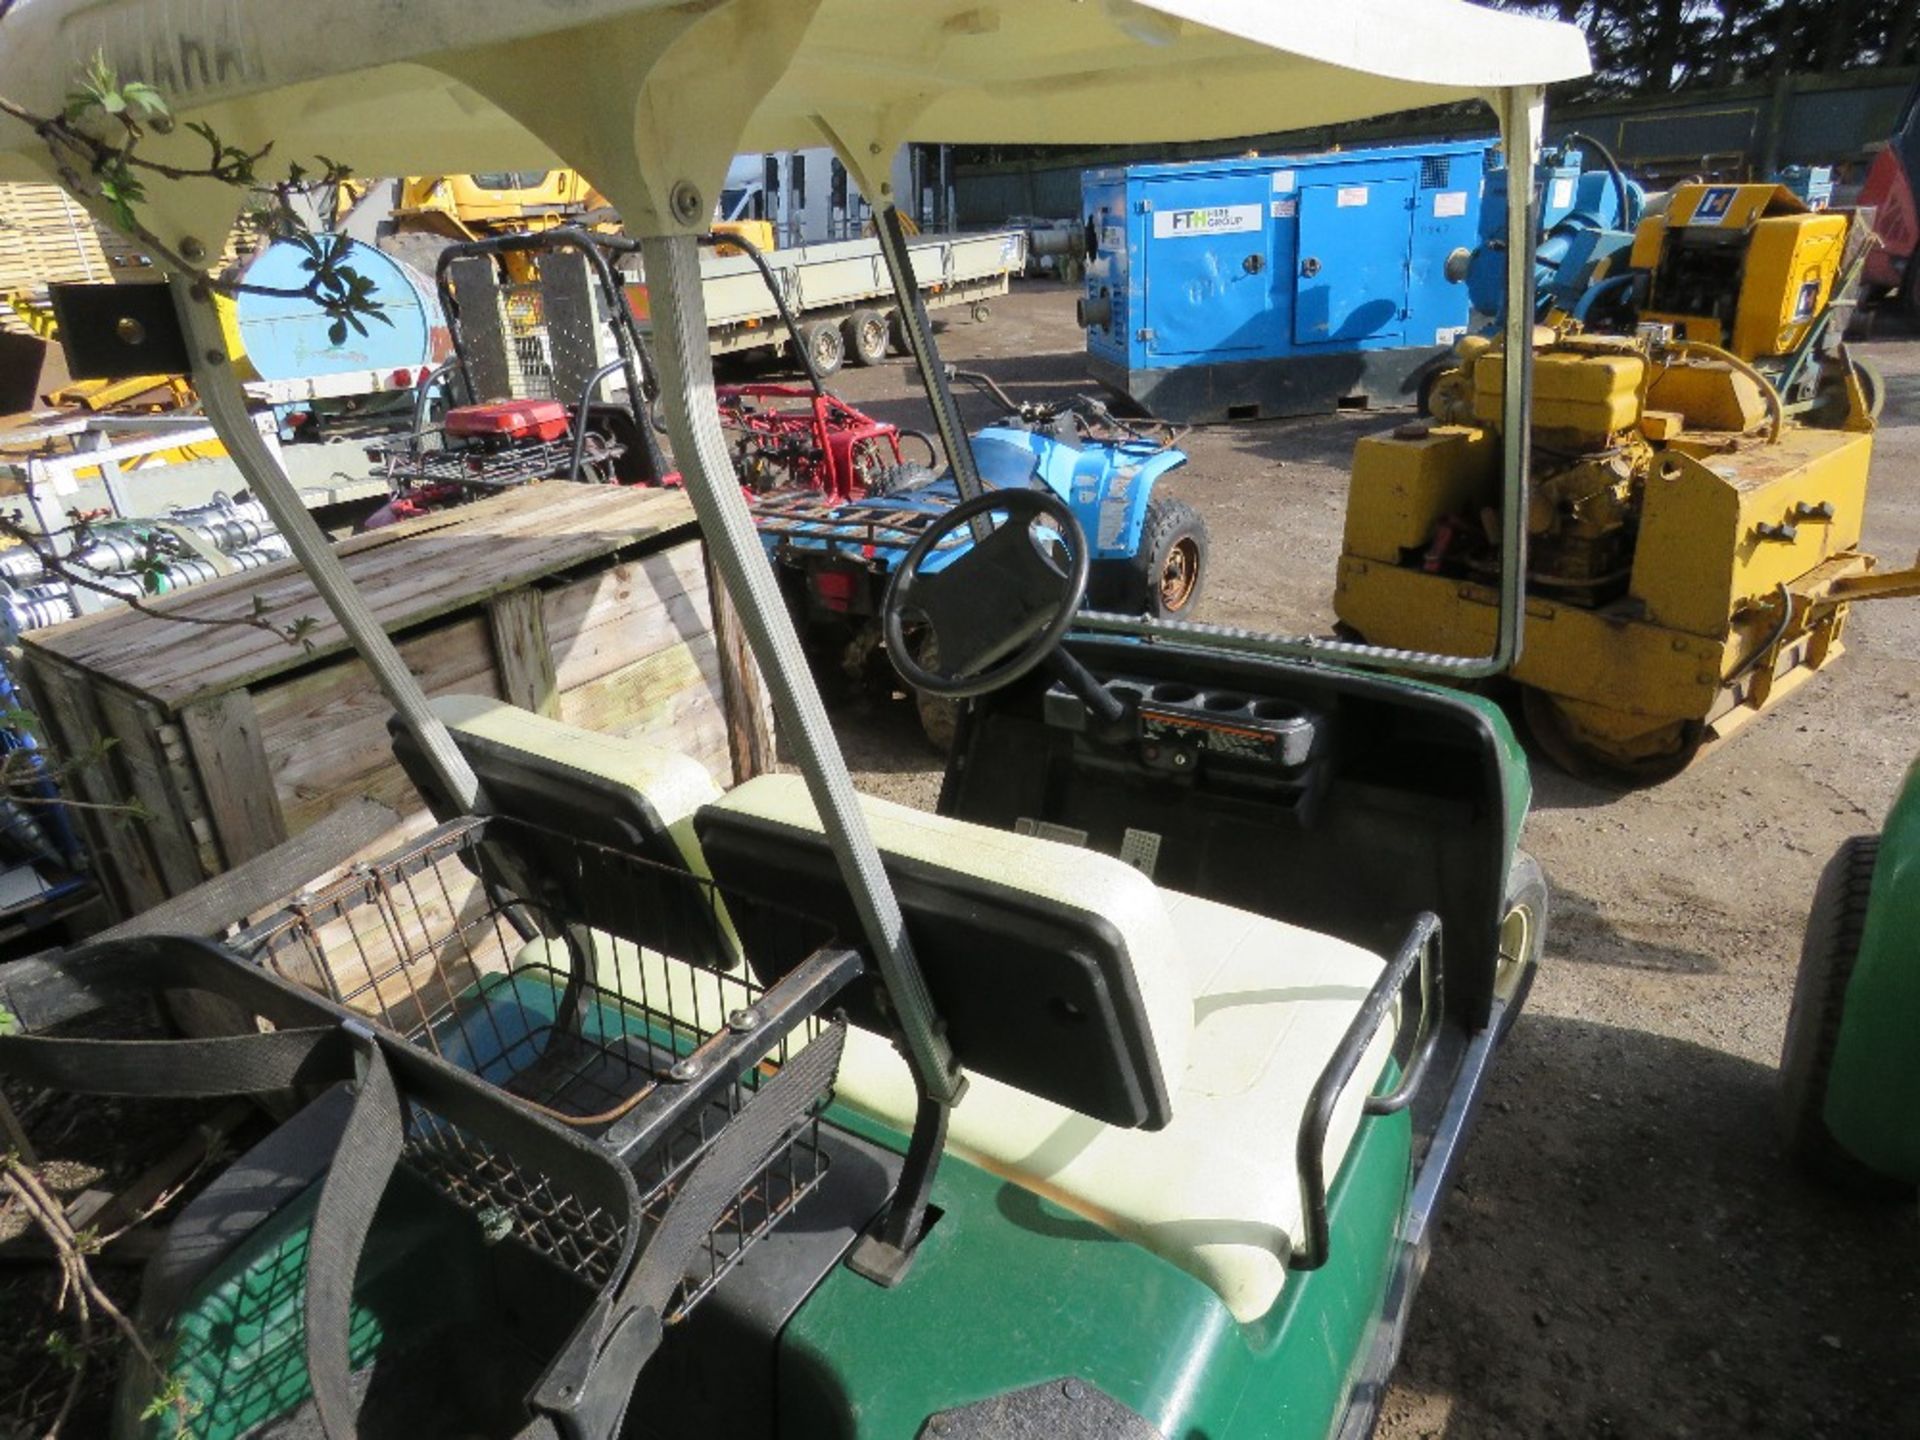 YAMAHA PETROL ENGINED GOLF BUGGY. WHNE TESTED WAS SEEN TO RUN AND DRIVE...SEE VIDEO. - Image 5 of 5